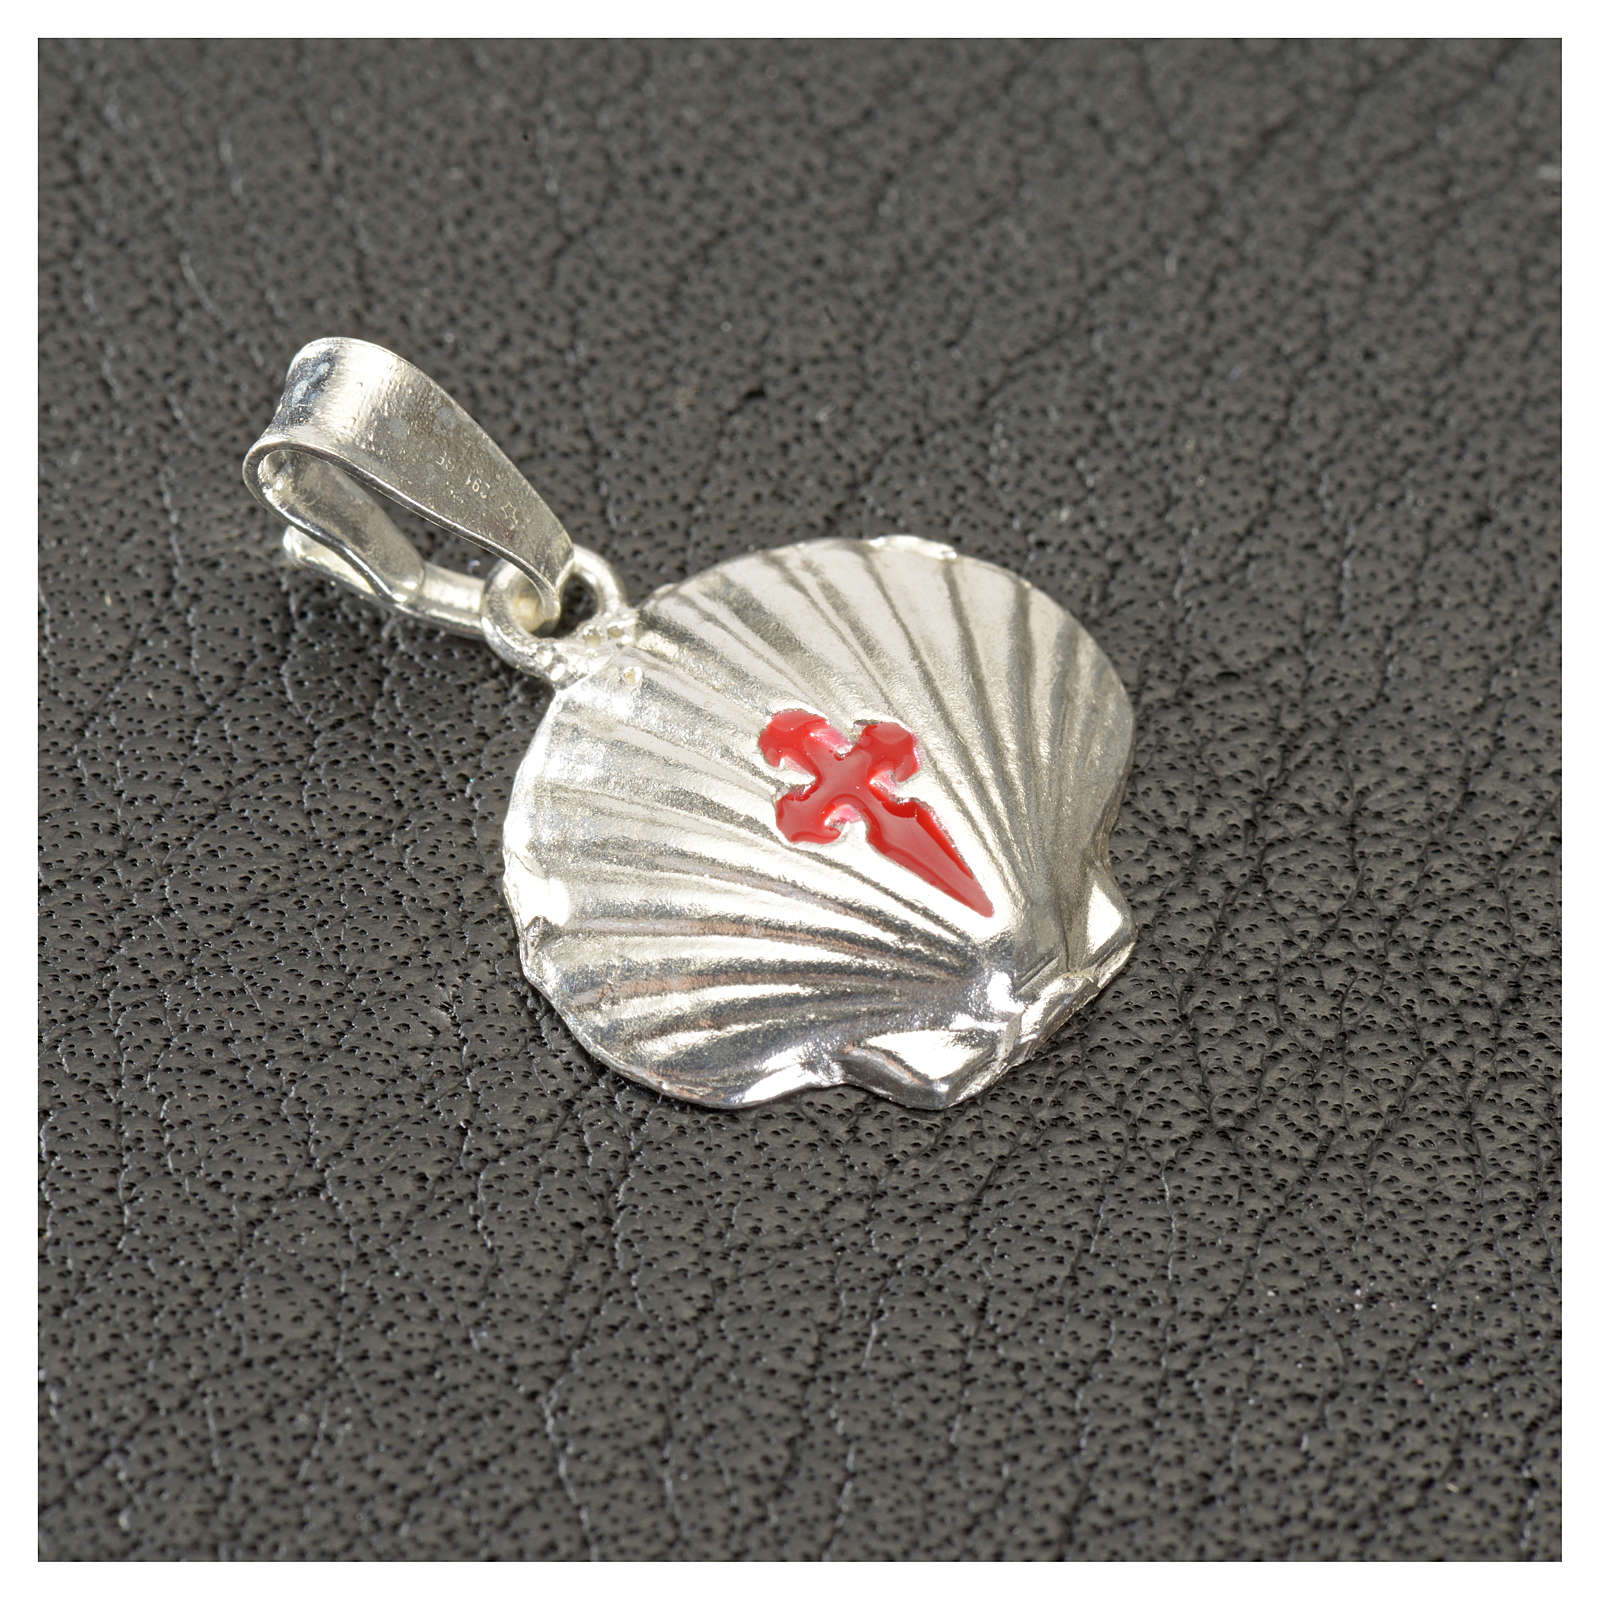 Details about   New Rhodium Plated 925 Sterling Silver 22 MM Scallop Shell Charm Pendant